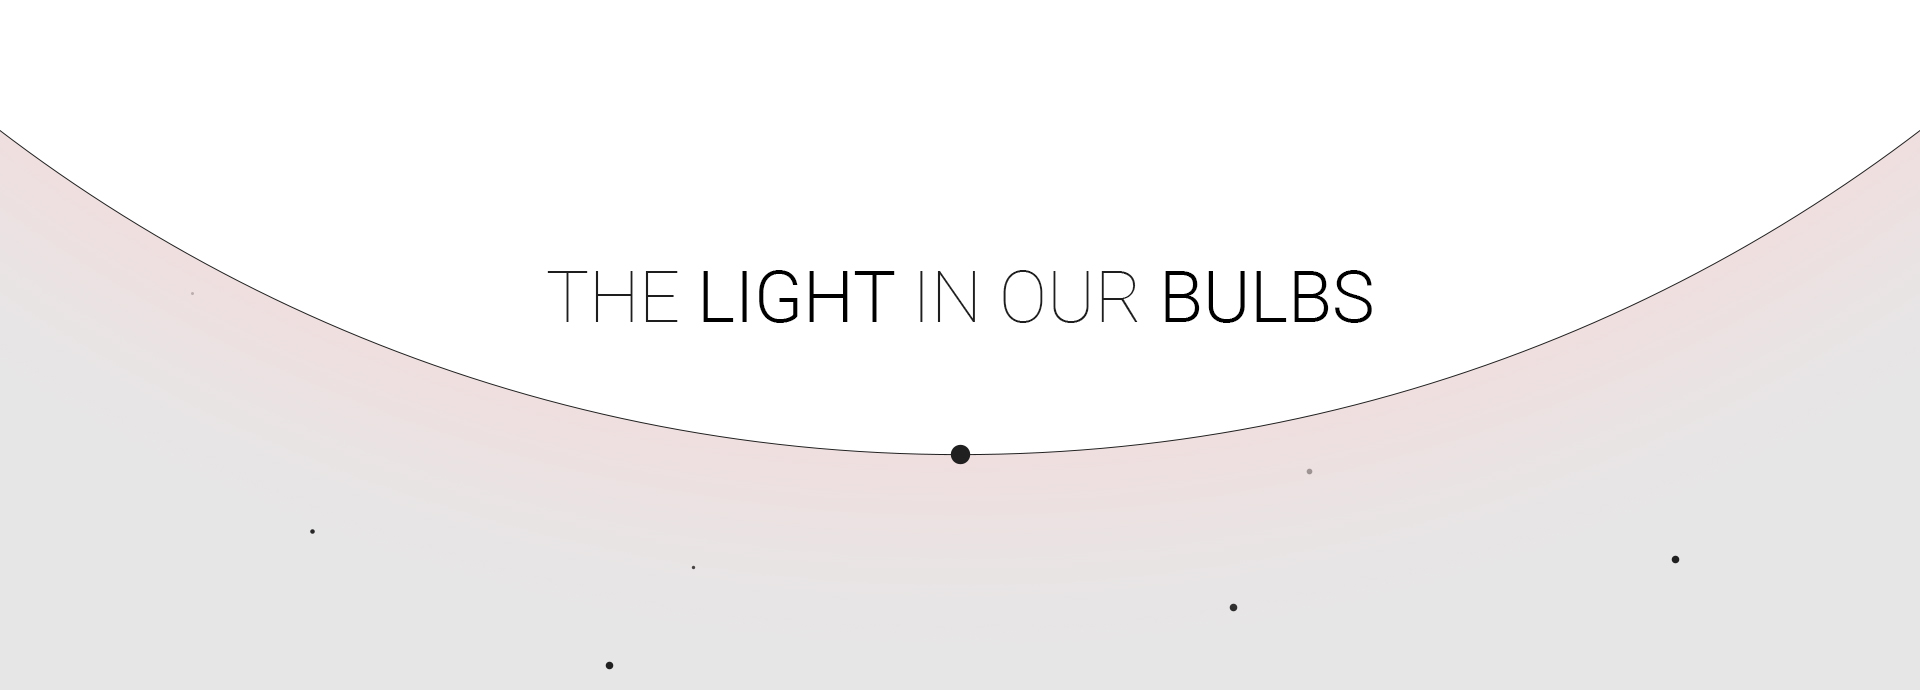 The Light in our Bulbs